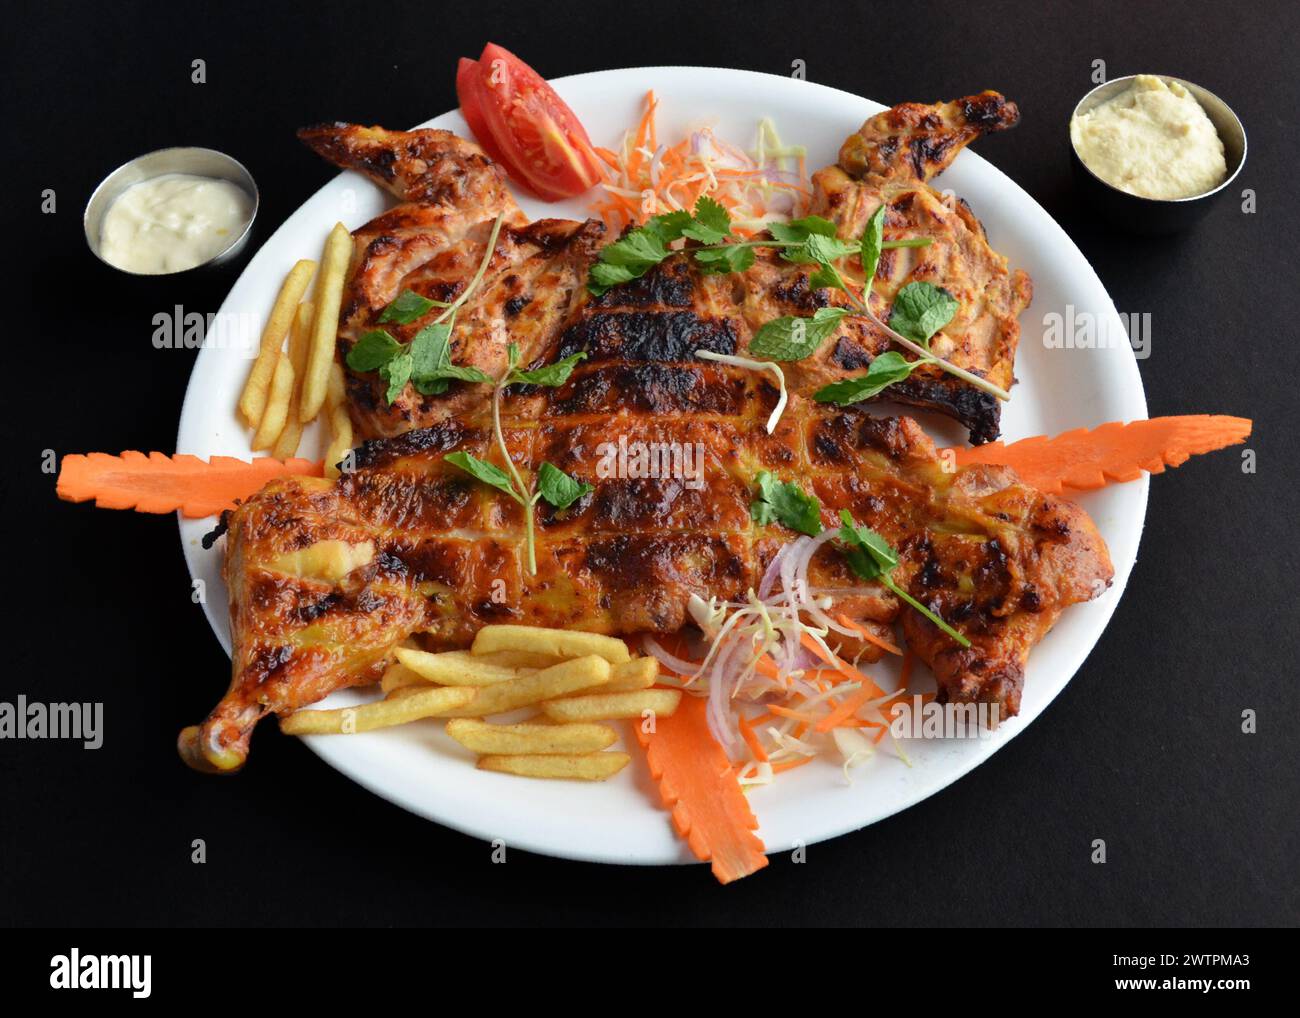 Alfahm is an Arabic grilled chicken marinated with Arabian spice and barbecued in charcoal. Stock Photo